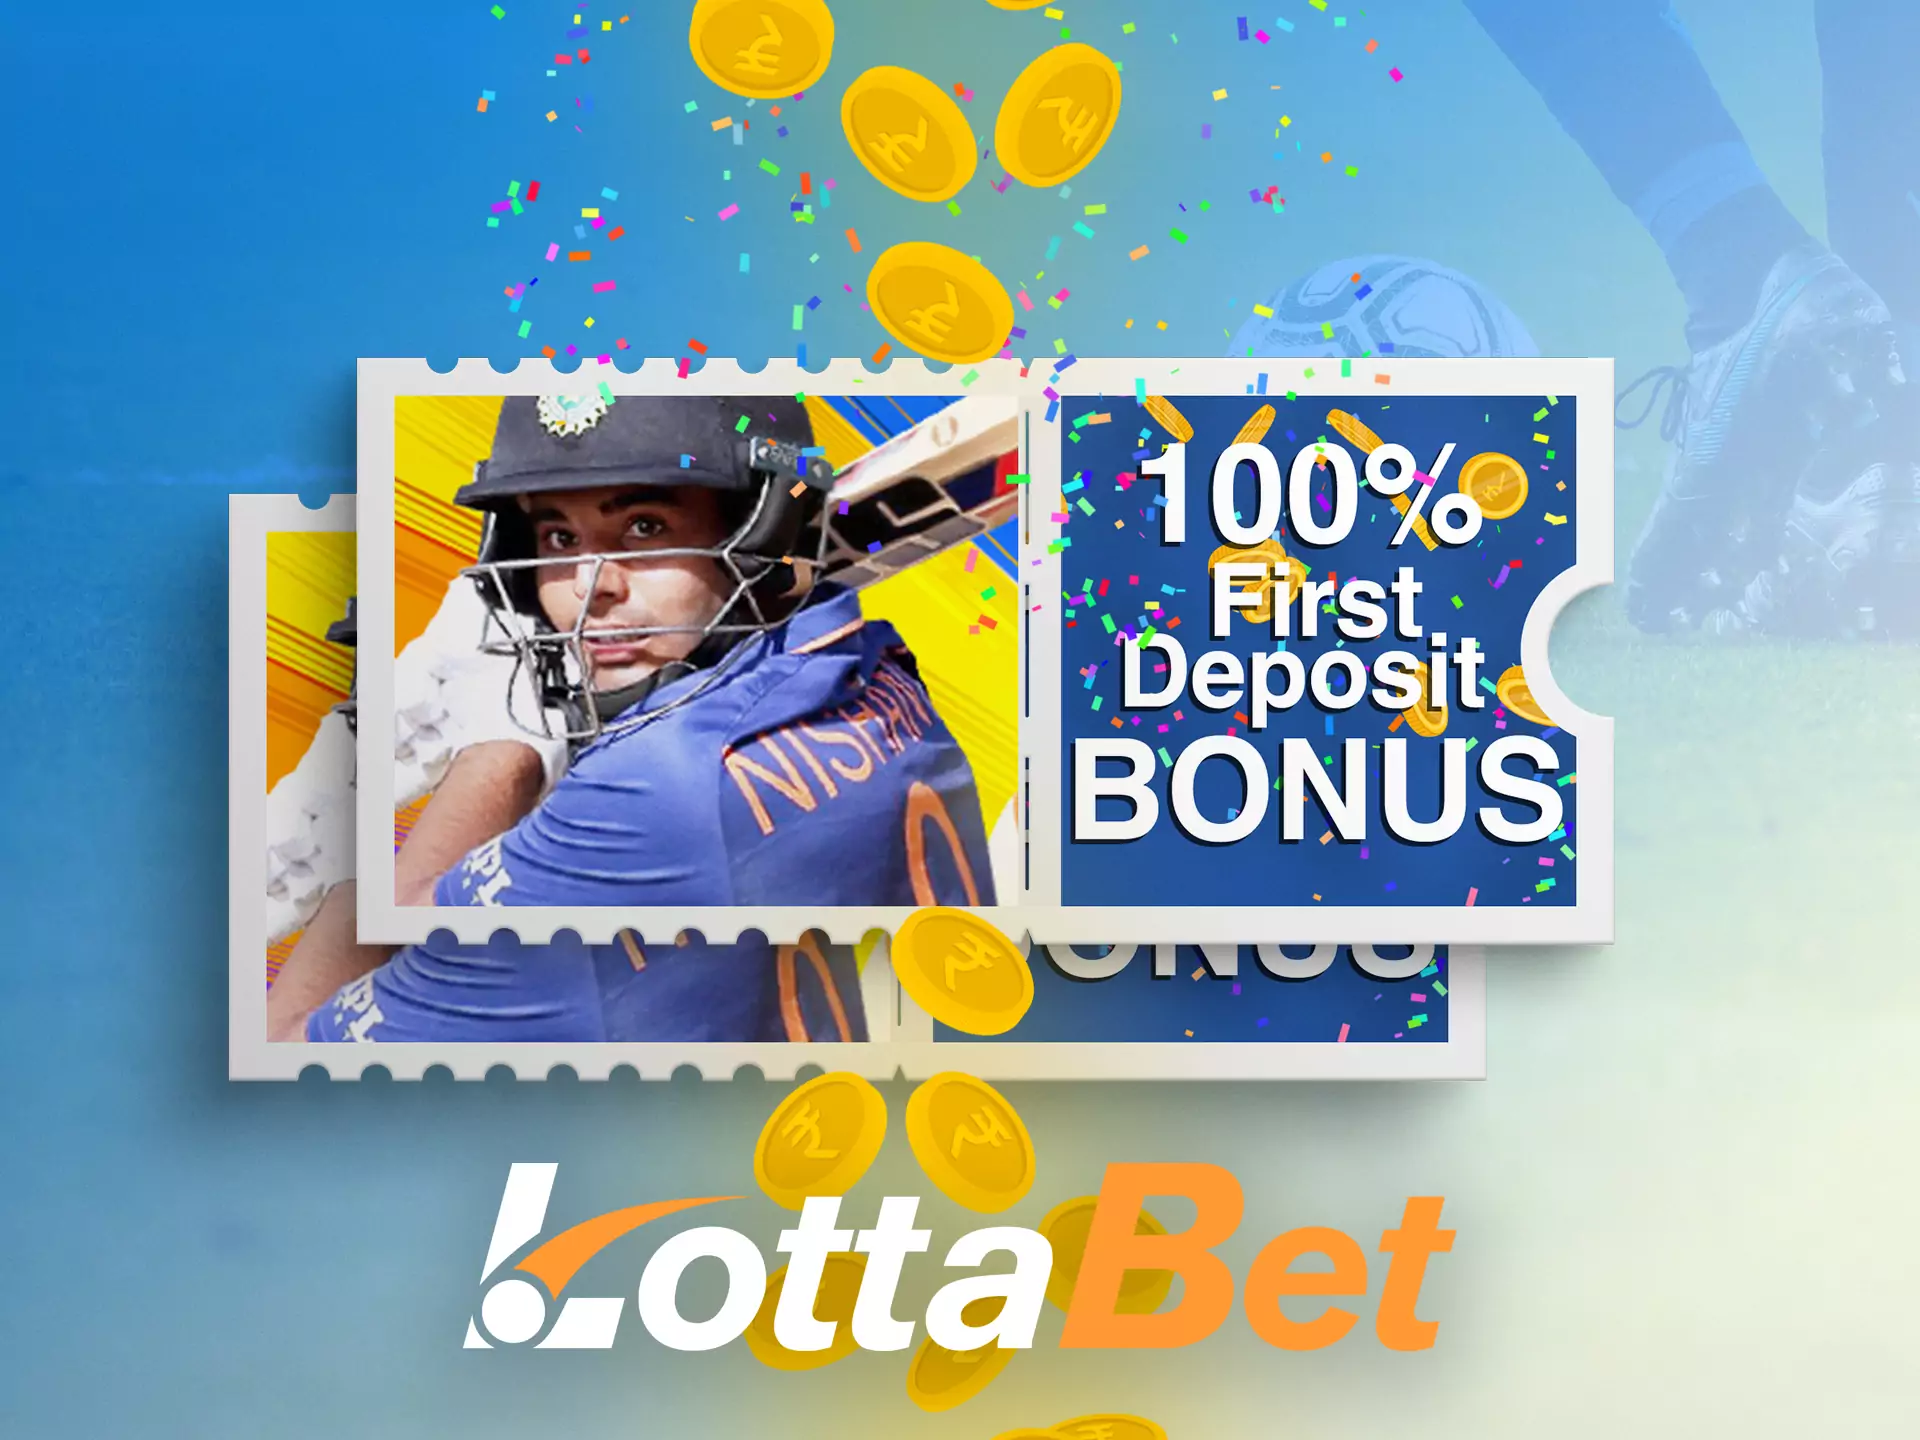 Top up your account to get the welcome bonus from Lottabet.